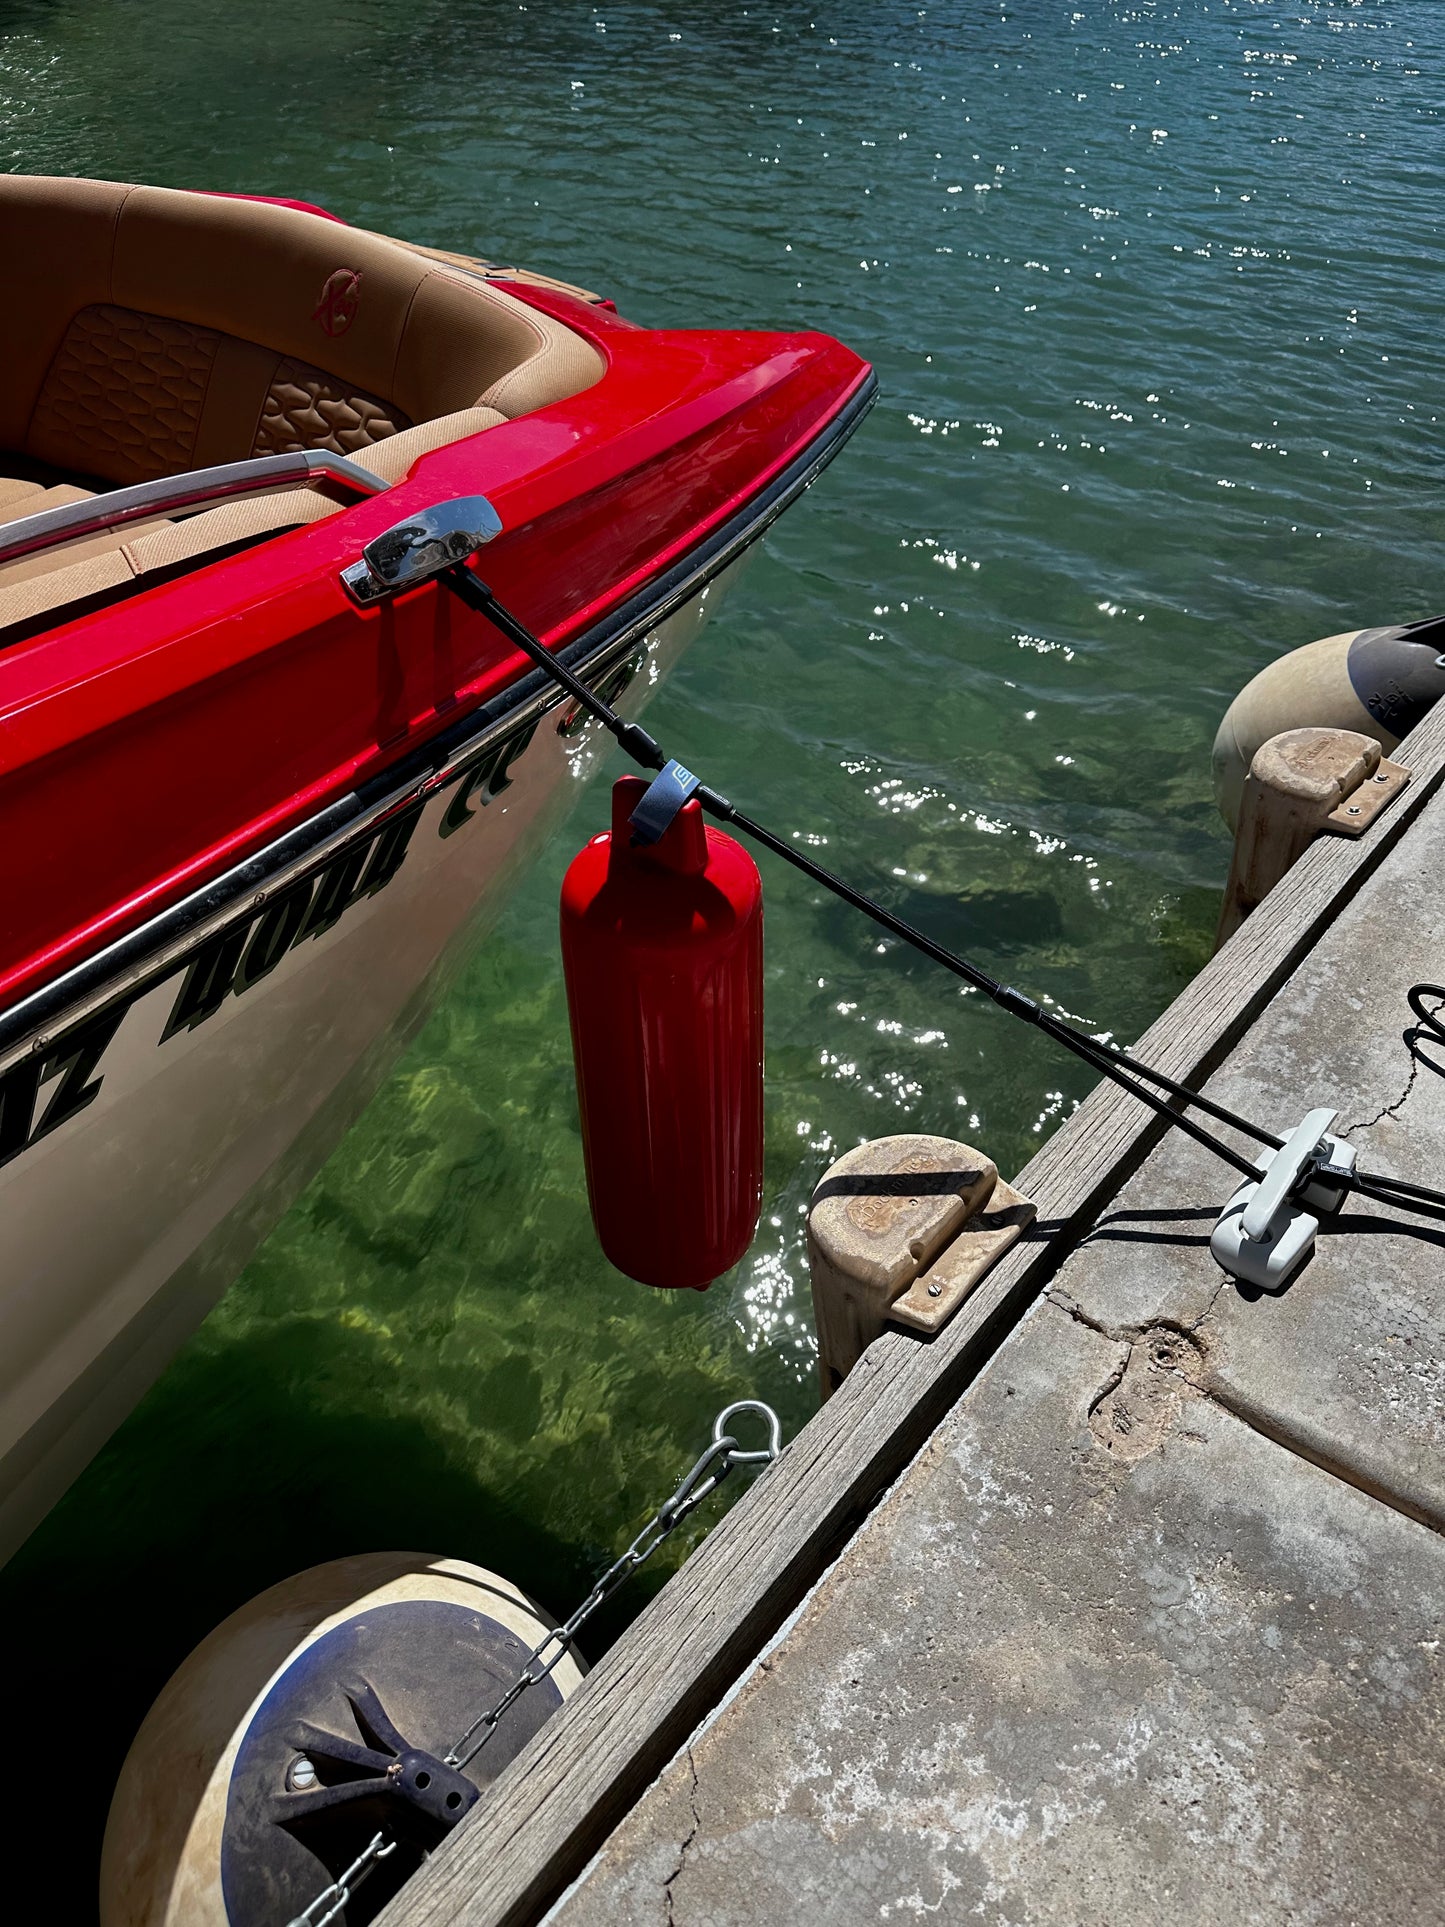 Swift Grip (2) Heavy Duty 5 Foot Adjustable Bungee Dock Lines for Boats, Mooring Lines, Jet ski Dock line, with Integrated Velcro Ties, Perfect for attaching Bumpers to Your PWC or Boat Dock Rope